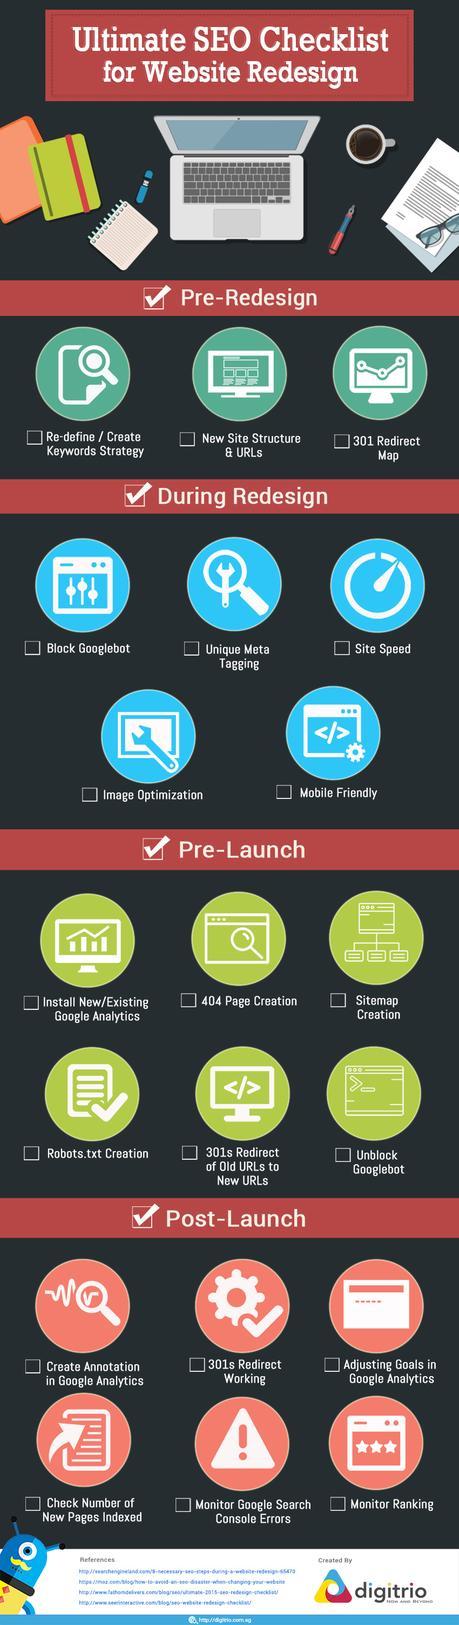 SEO Checklist For A Website Redesign Infographic